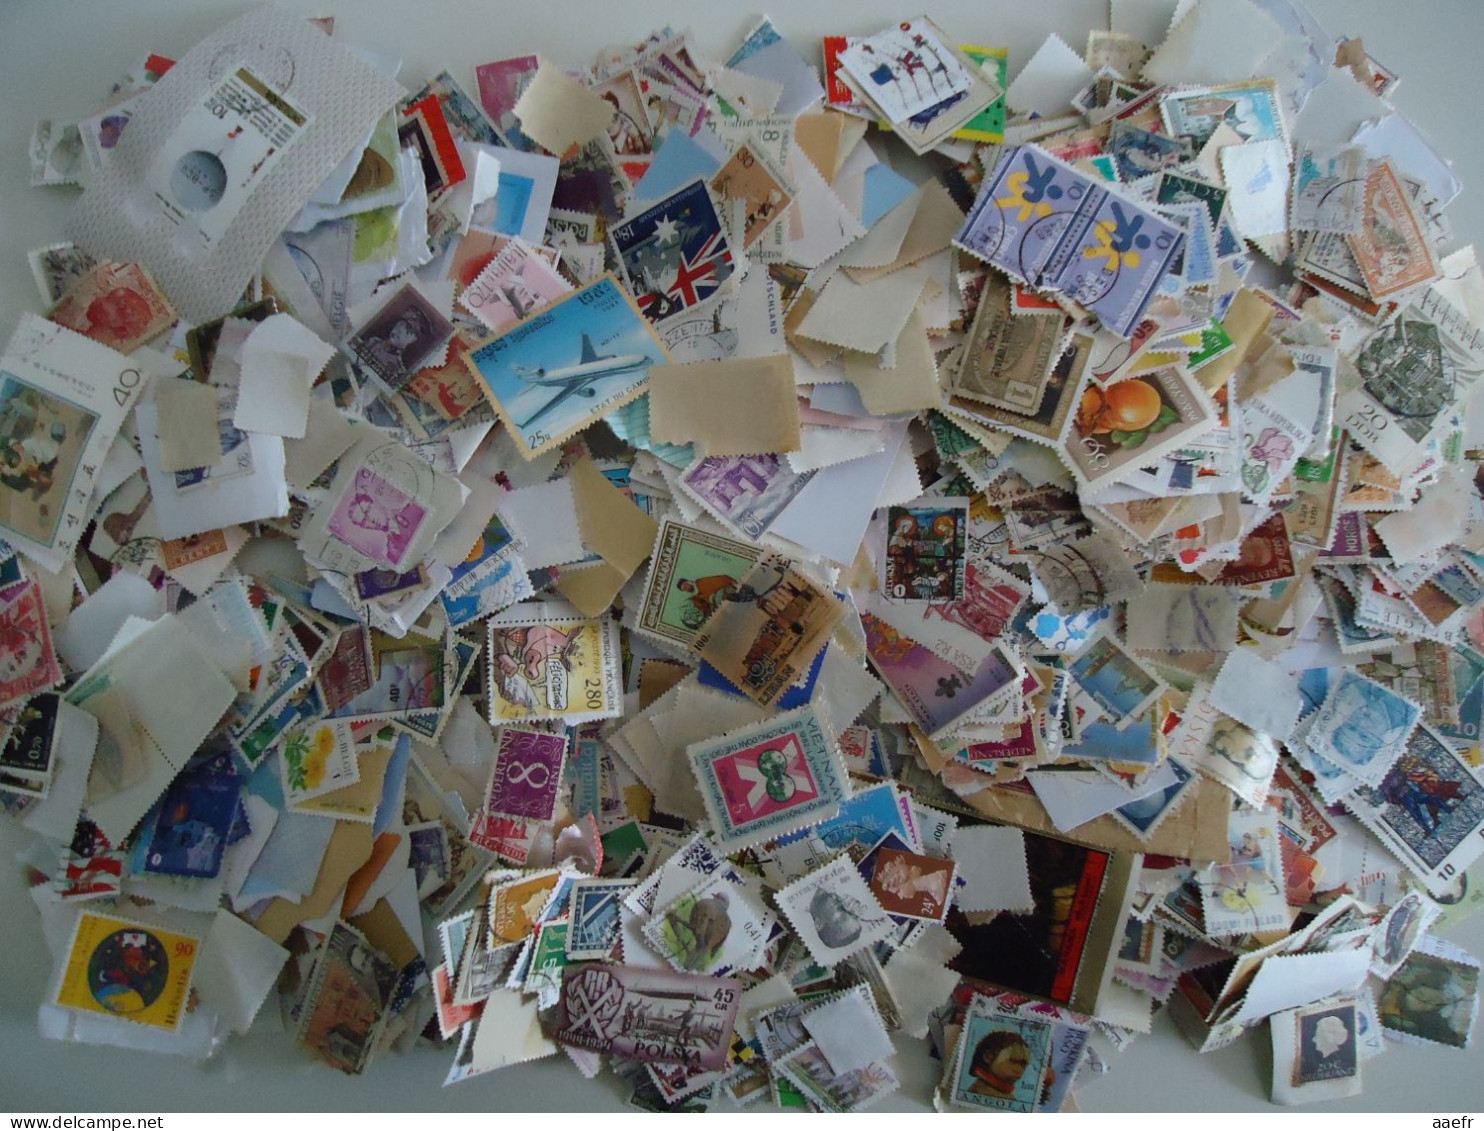 Monde -  100 % Timbres DEFECTUEUX / 100% Stamps With DEFECTS - 345 Gr = +/- 3500 Timbres/Stamps - Lots & Kiloware (mixtures) - Min. 1000 Stamps